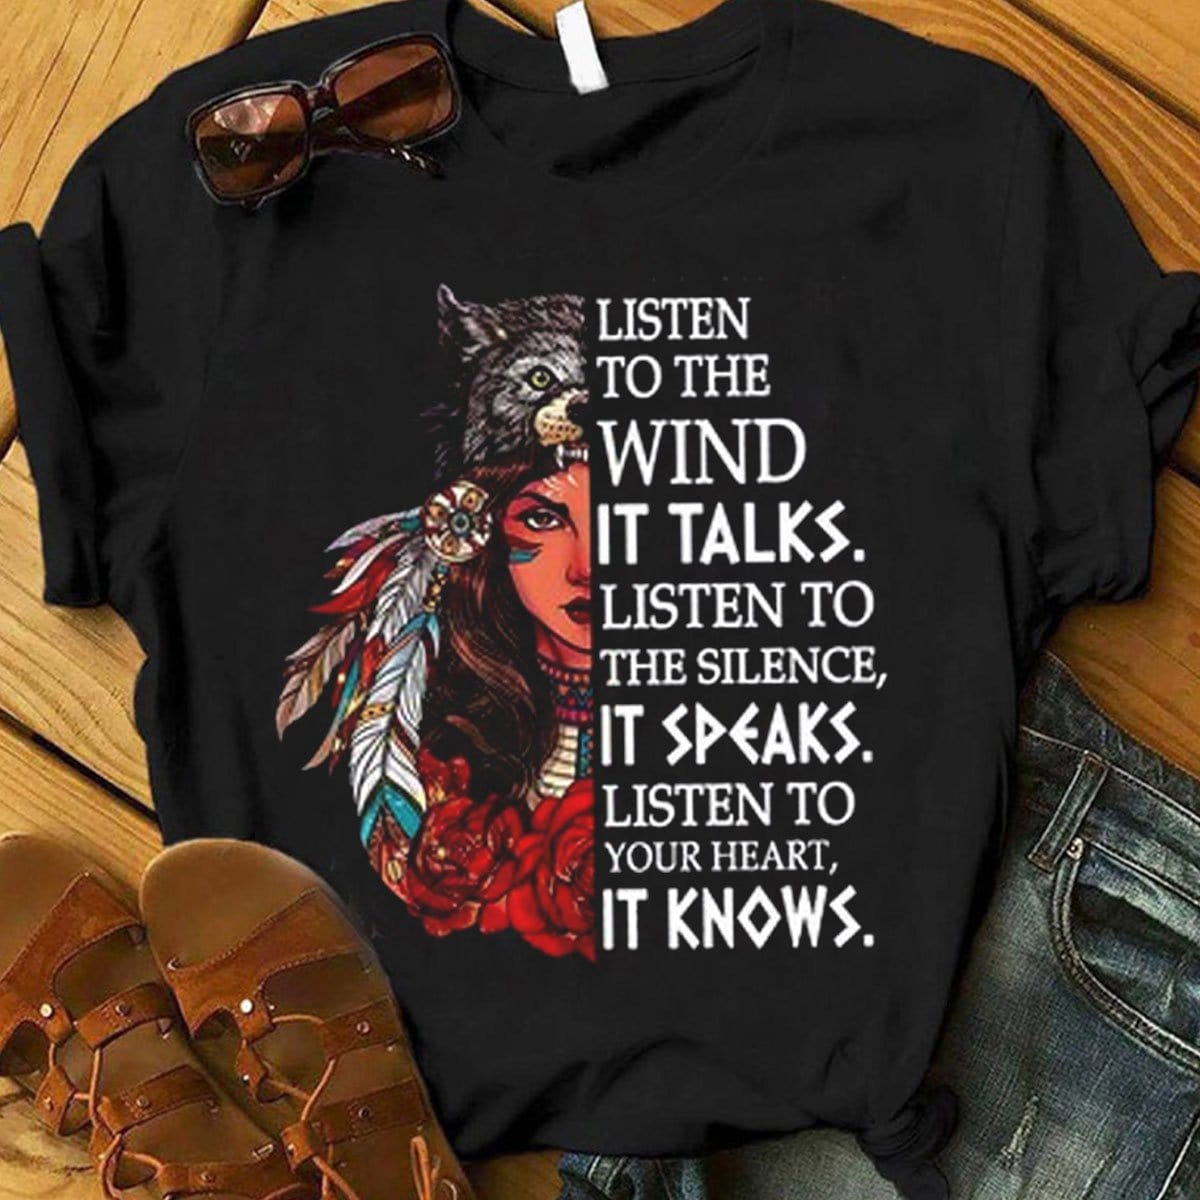 Listen To The Wind It Talks Native American Shirts